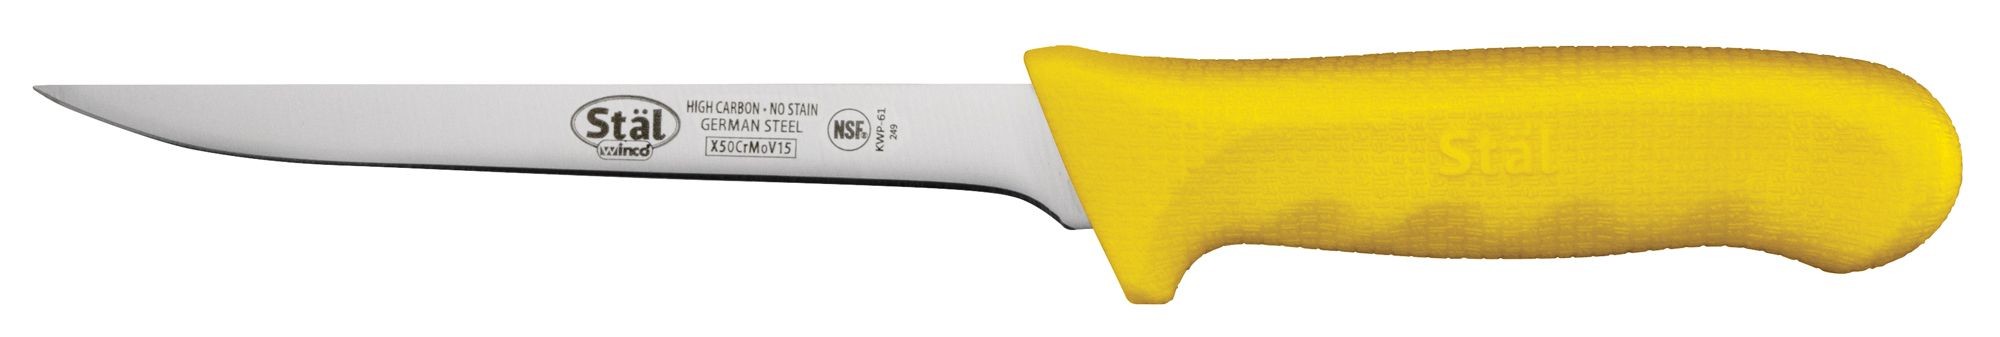 Winco KWP-61Y Narrow 6" Boning Knife with Yellow Handle